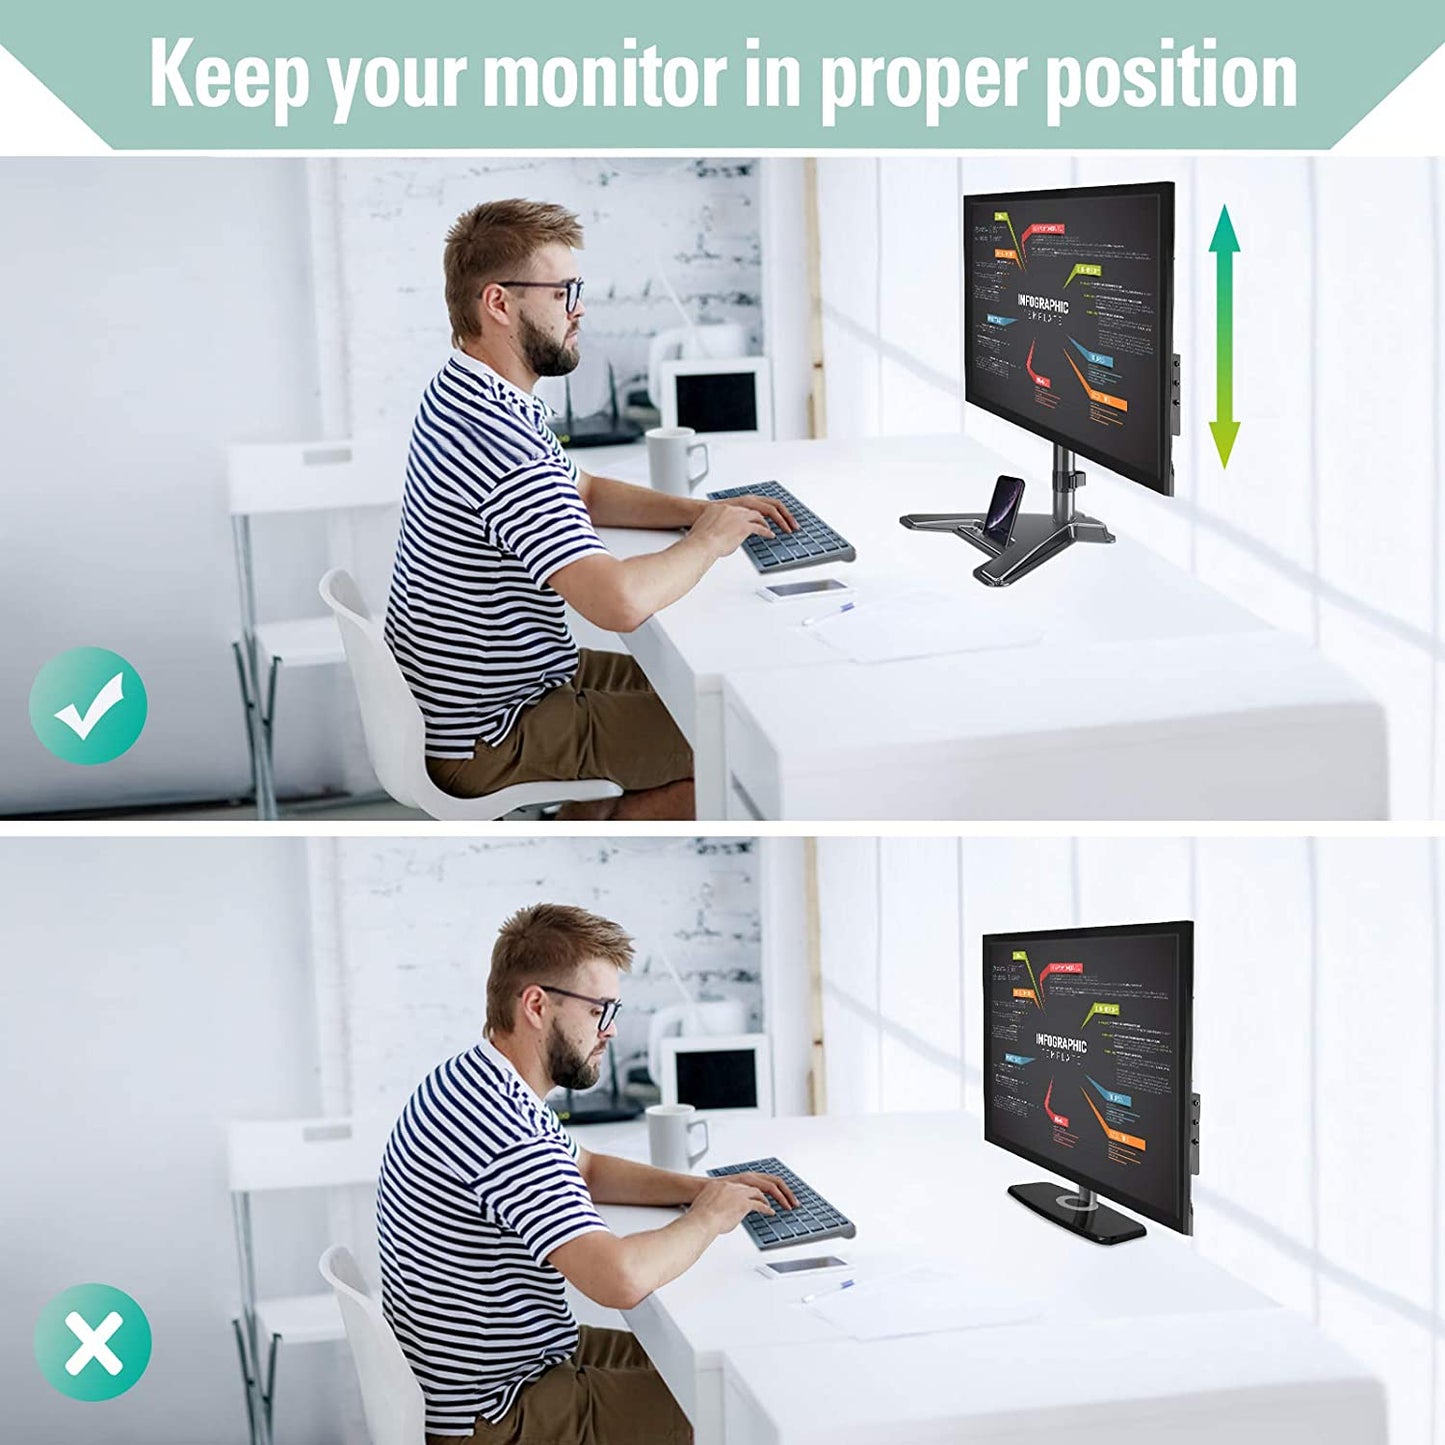 Single Arm adjustable monitor desk stand to raise or lower your monitor to a proper position